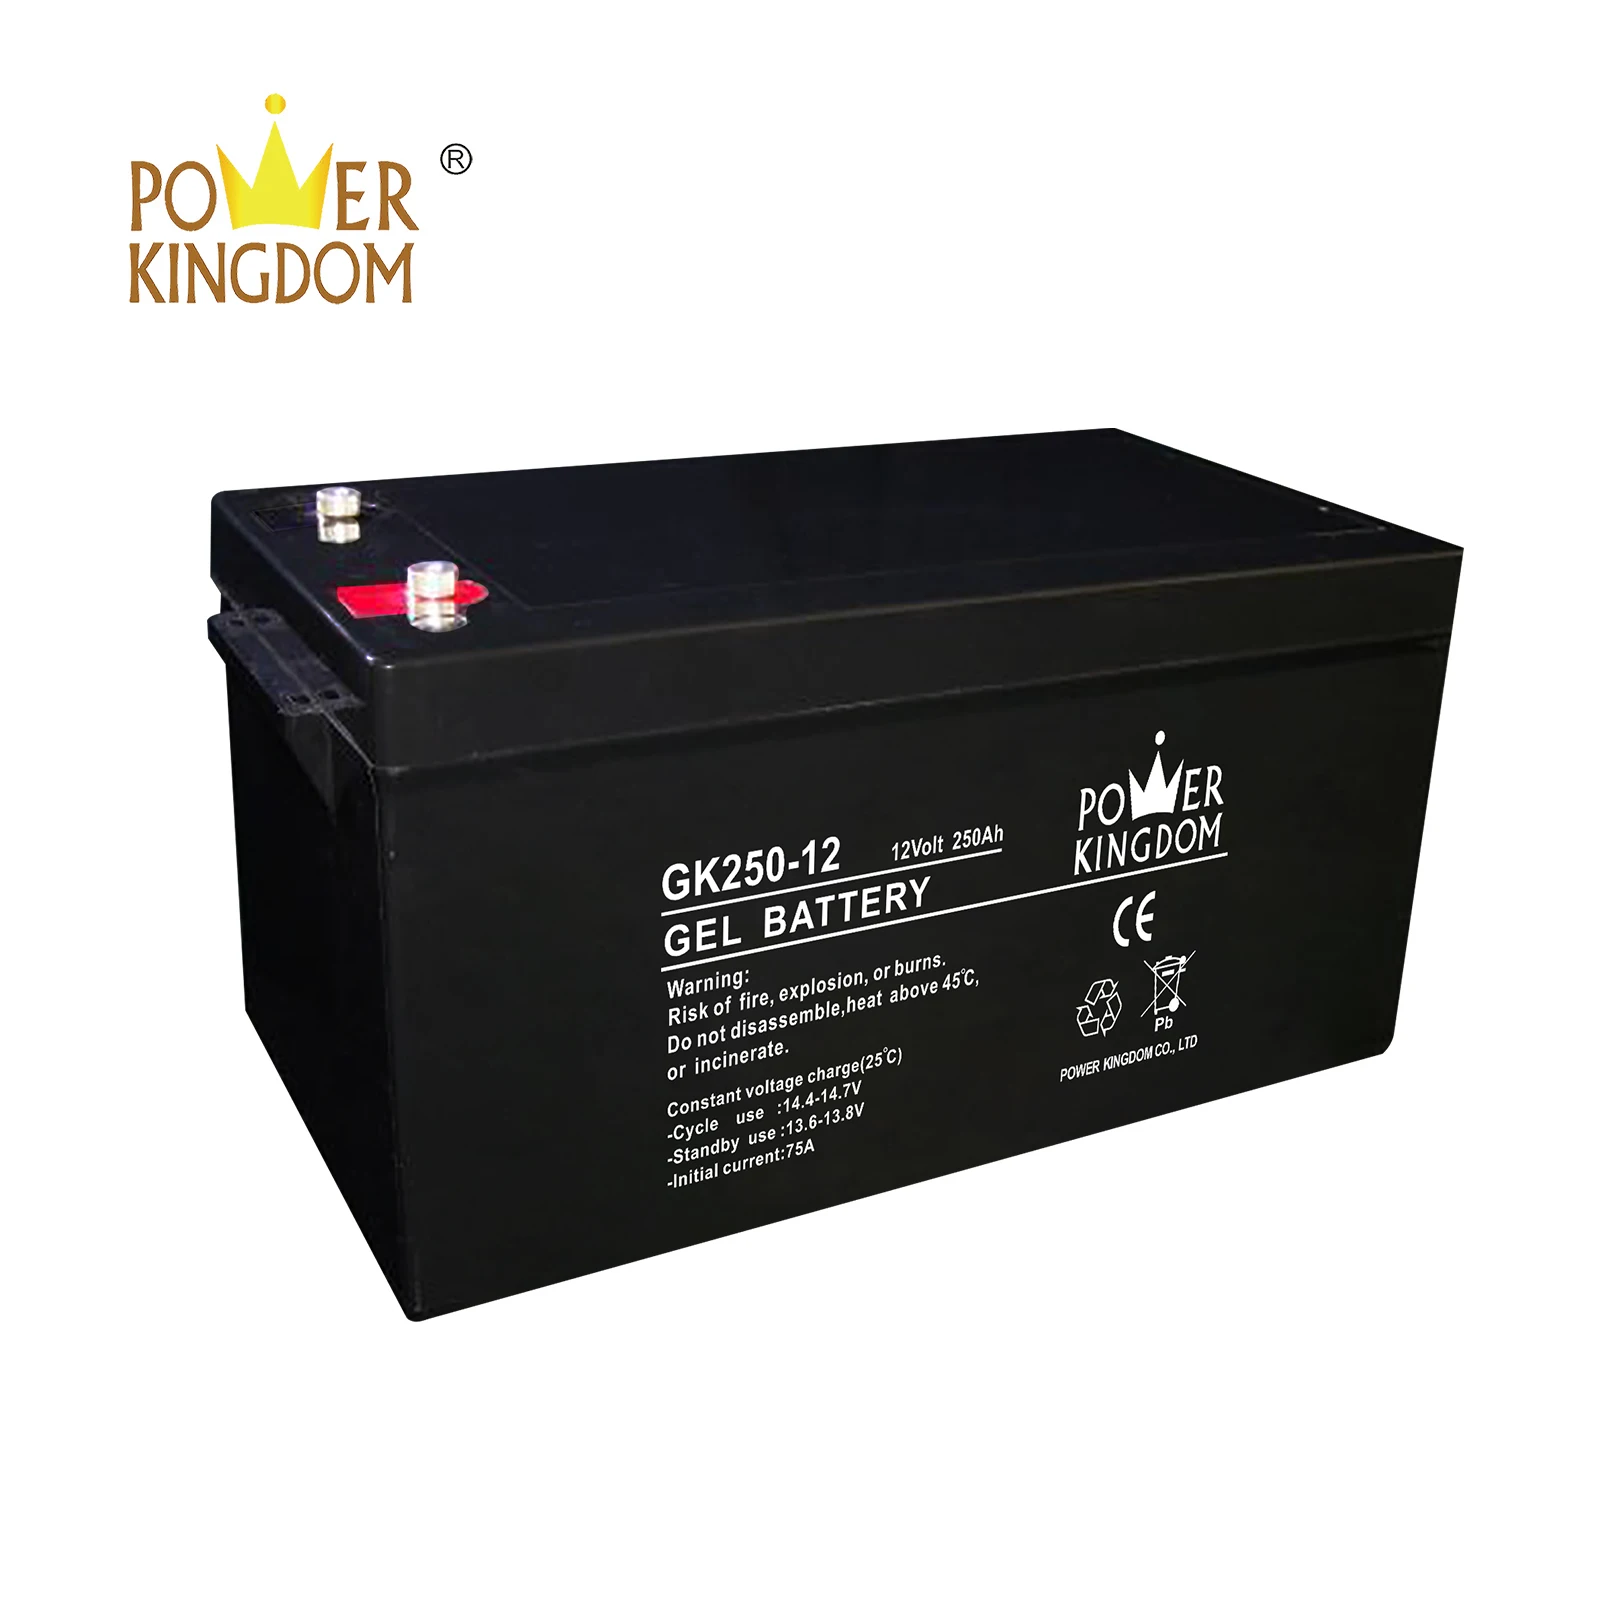 Power Kingdom higher specific energy ups battery pack inquire now medical equipment